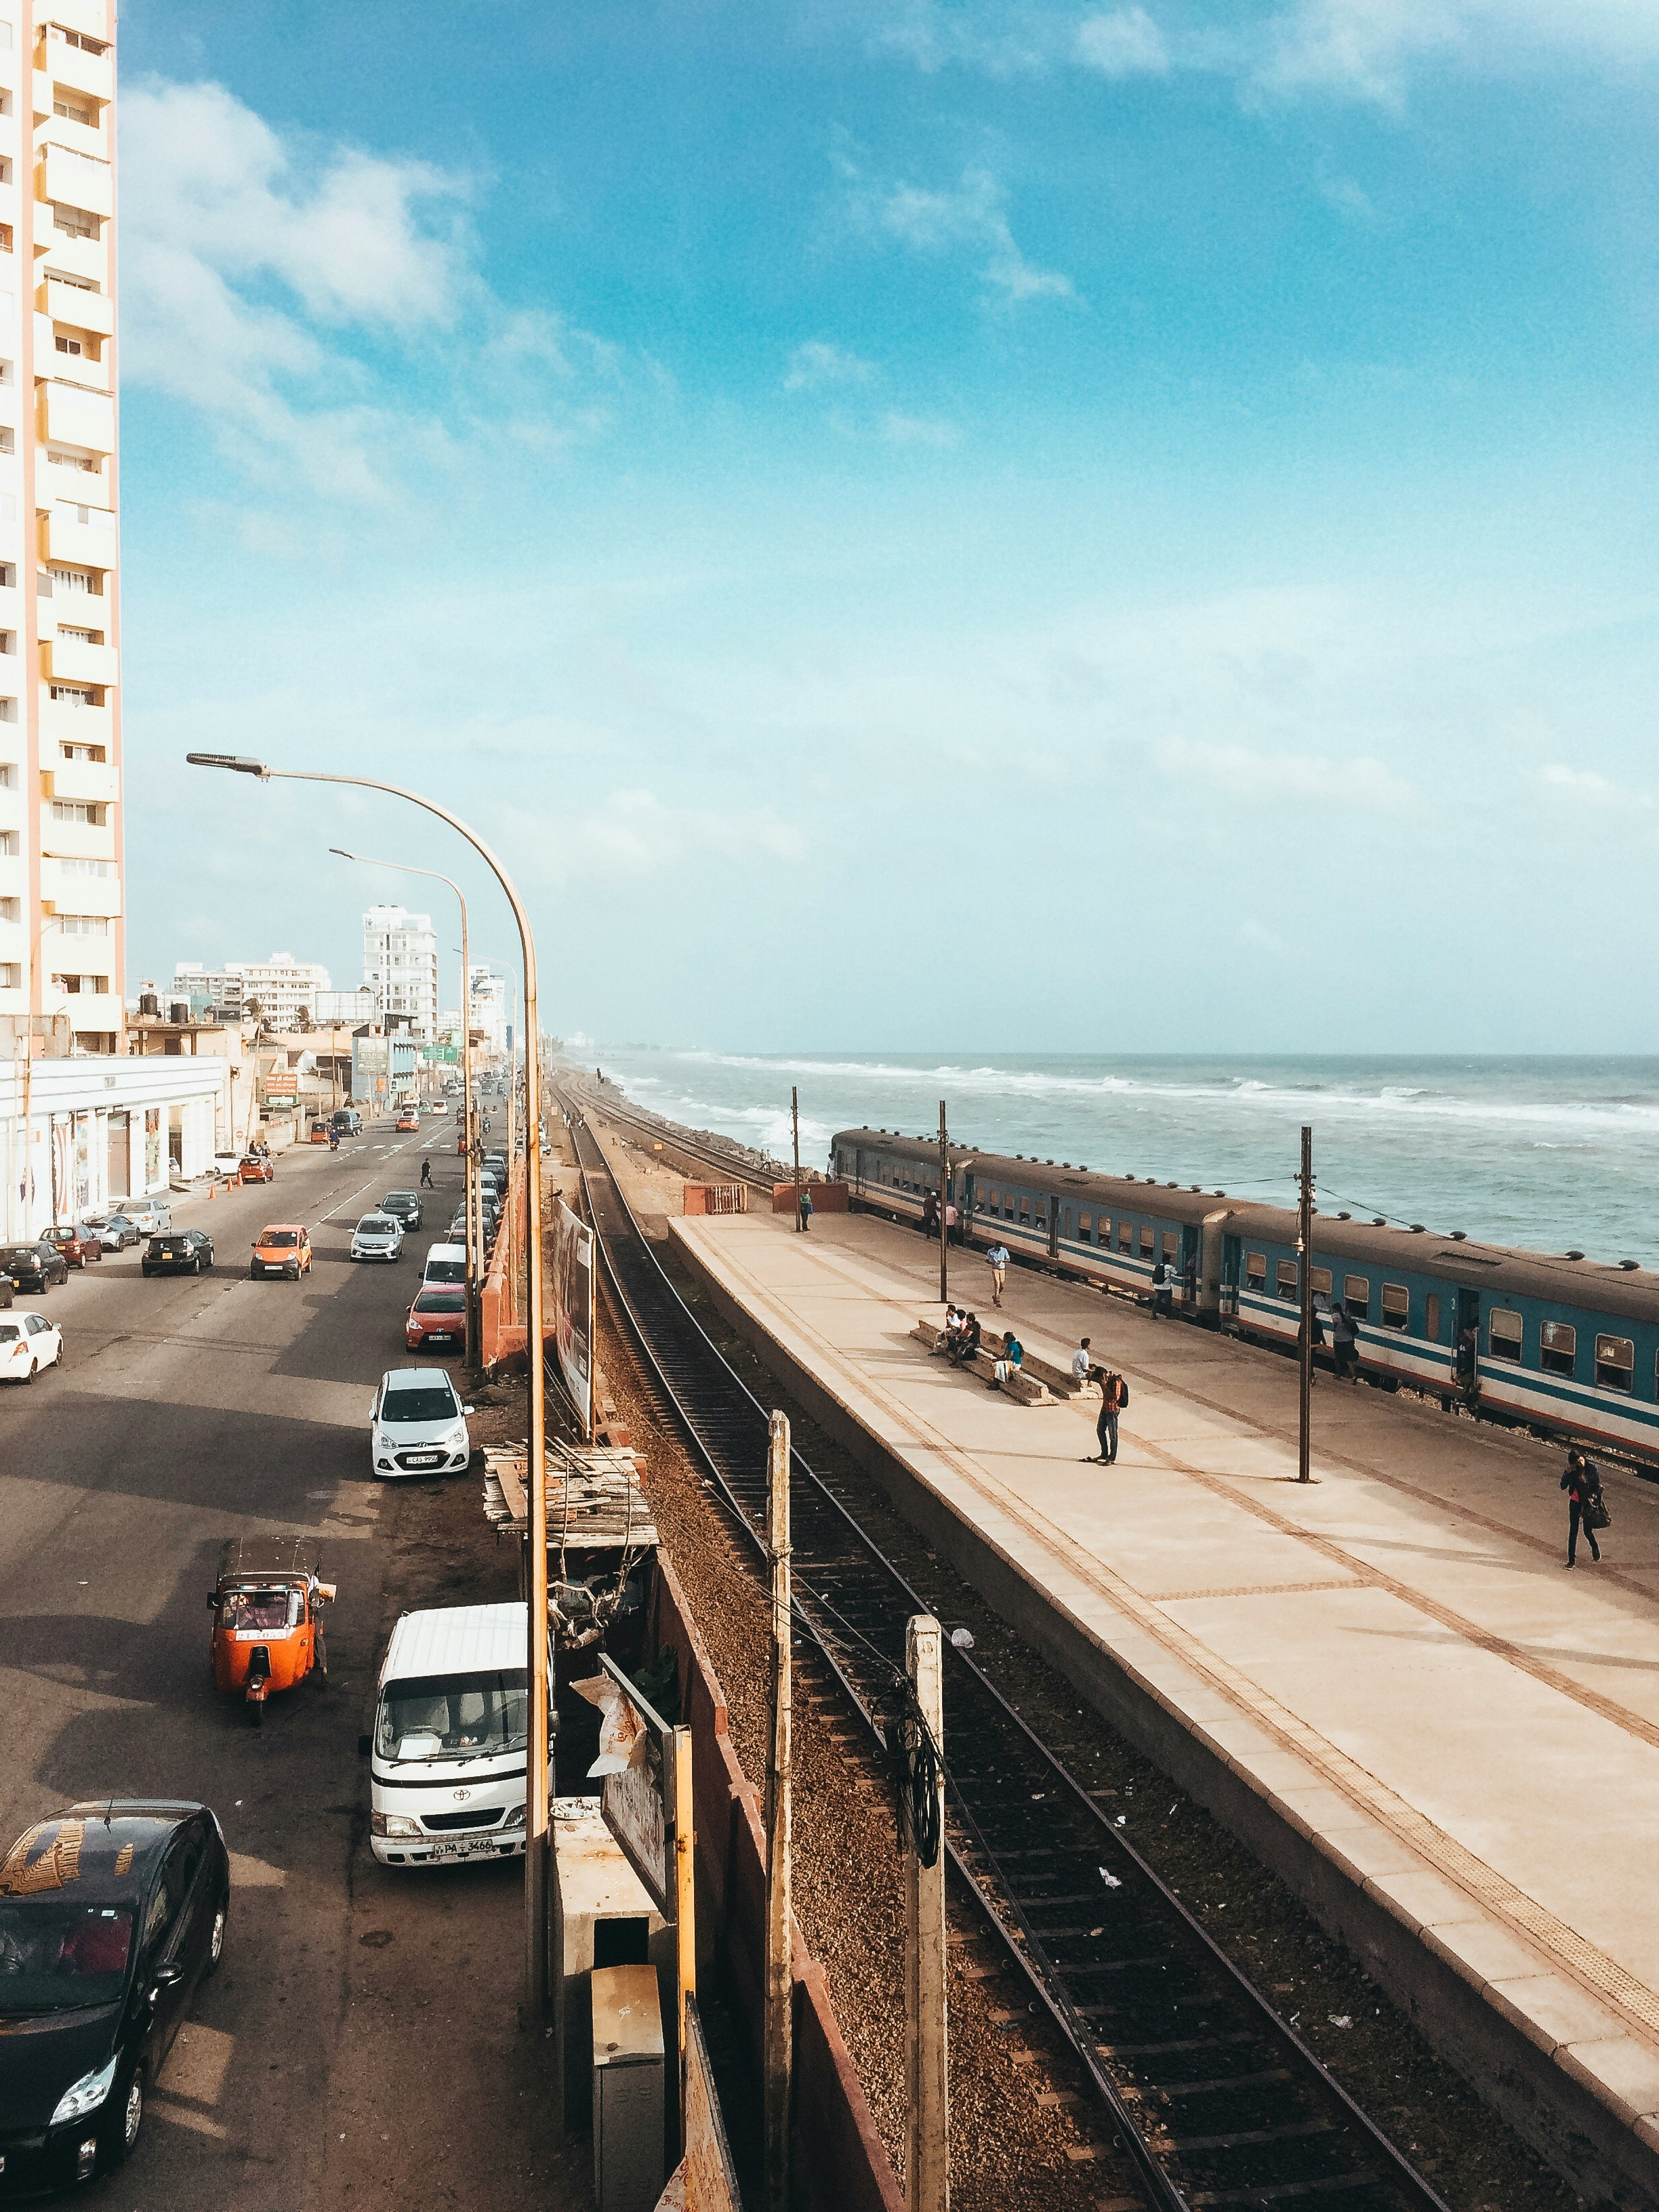 A photo of Marine Drive, Colombo. A train track lies between the sea and a road. Cars and a train drive by while people sit by the train tracks. The sky is light blue and the waves are calm.